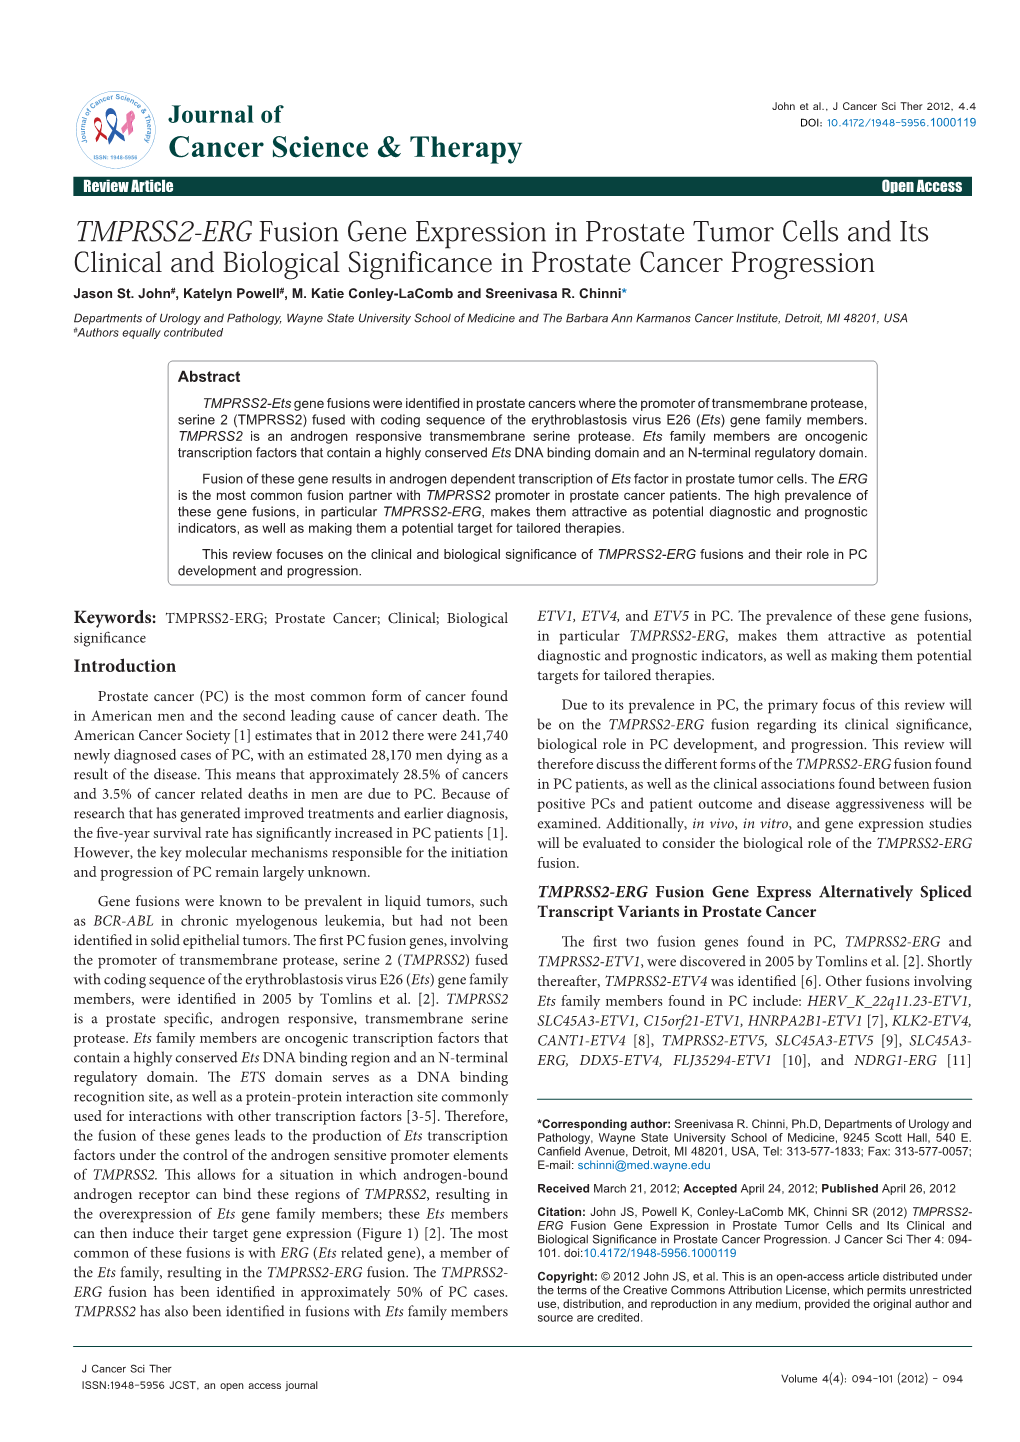 TMPRSS2-ERG Fusion Gene Expression in Prostate Tumor Cells and Its Clinical and Biological Significance in Prostate Cancer Progression Jason St